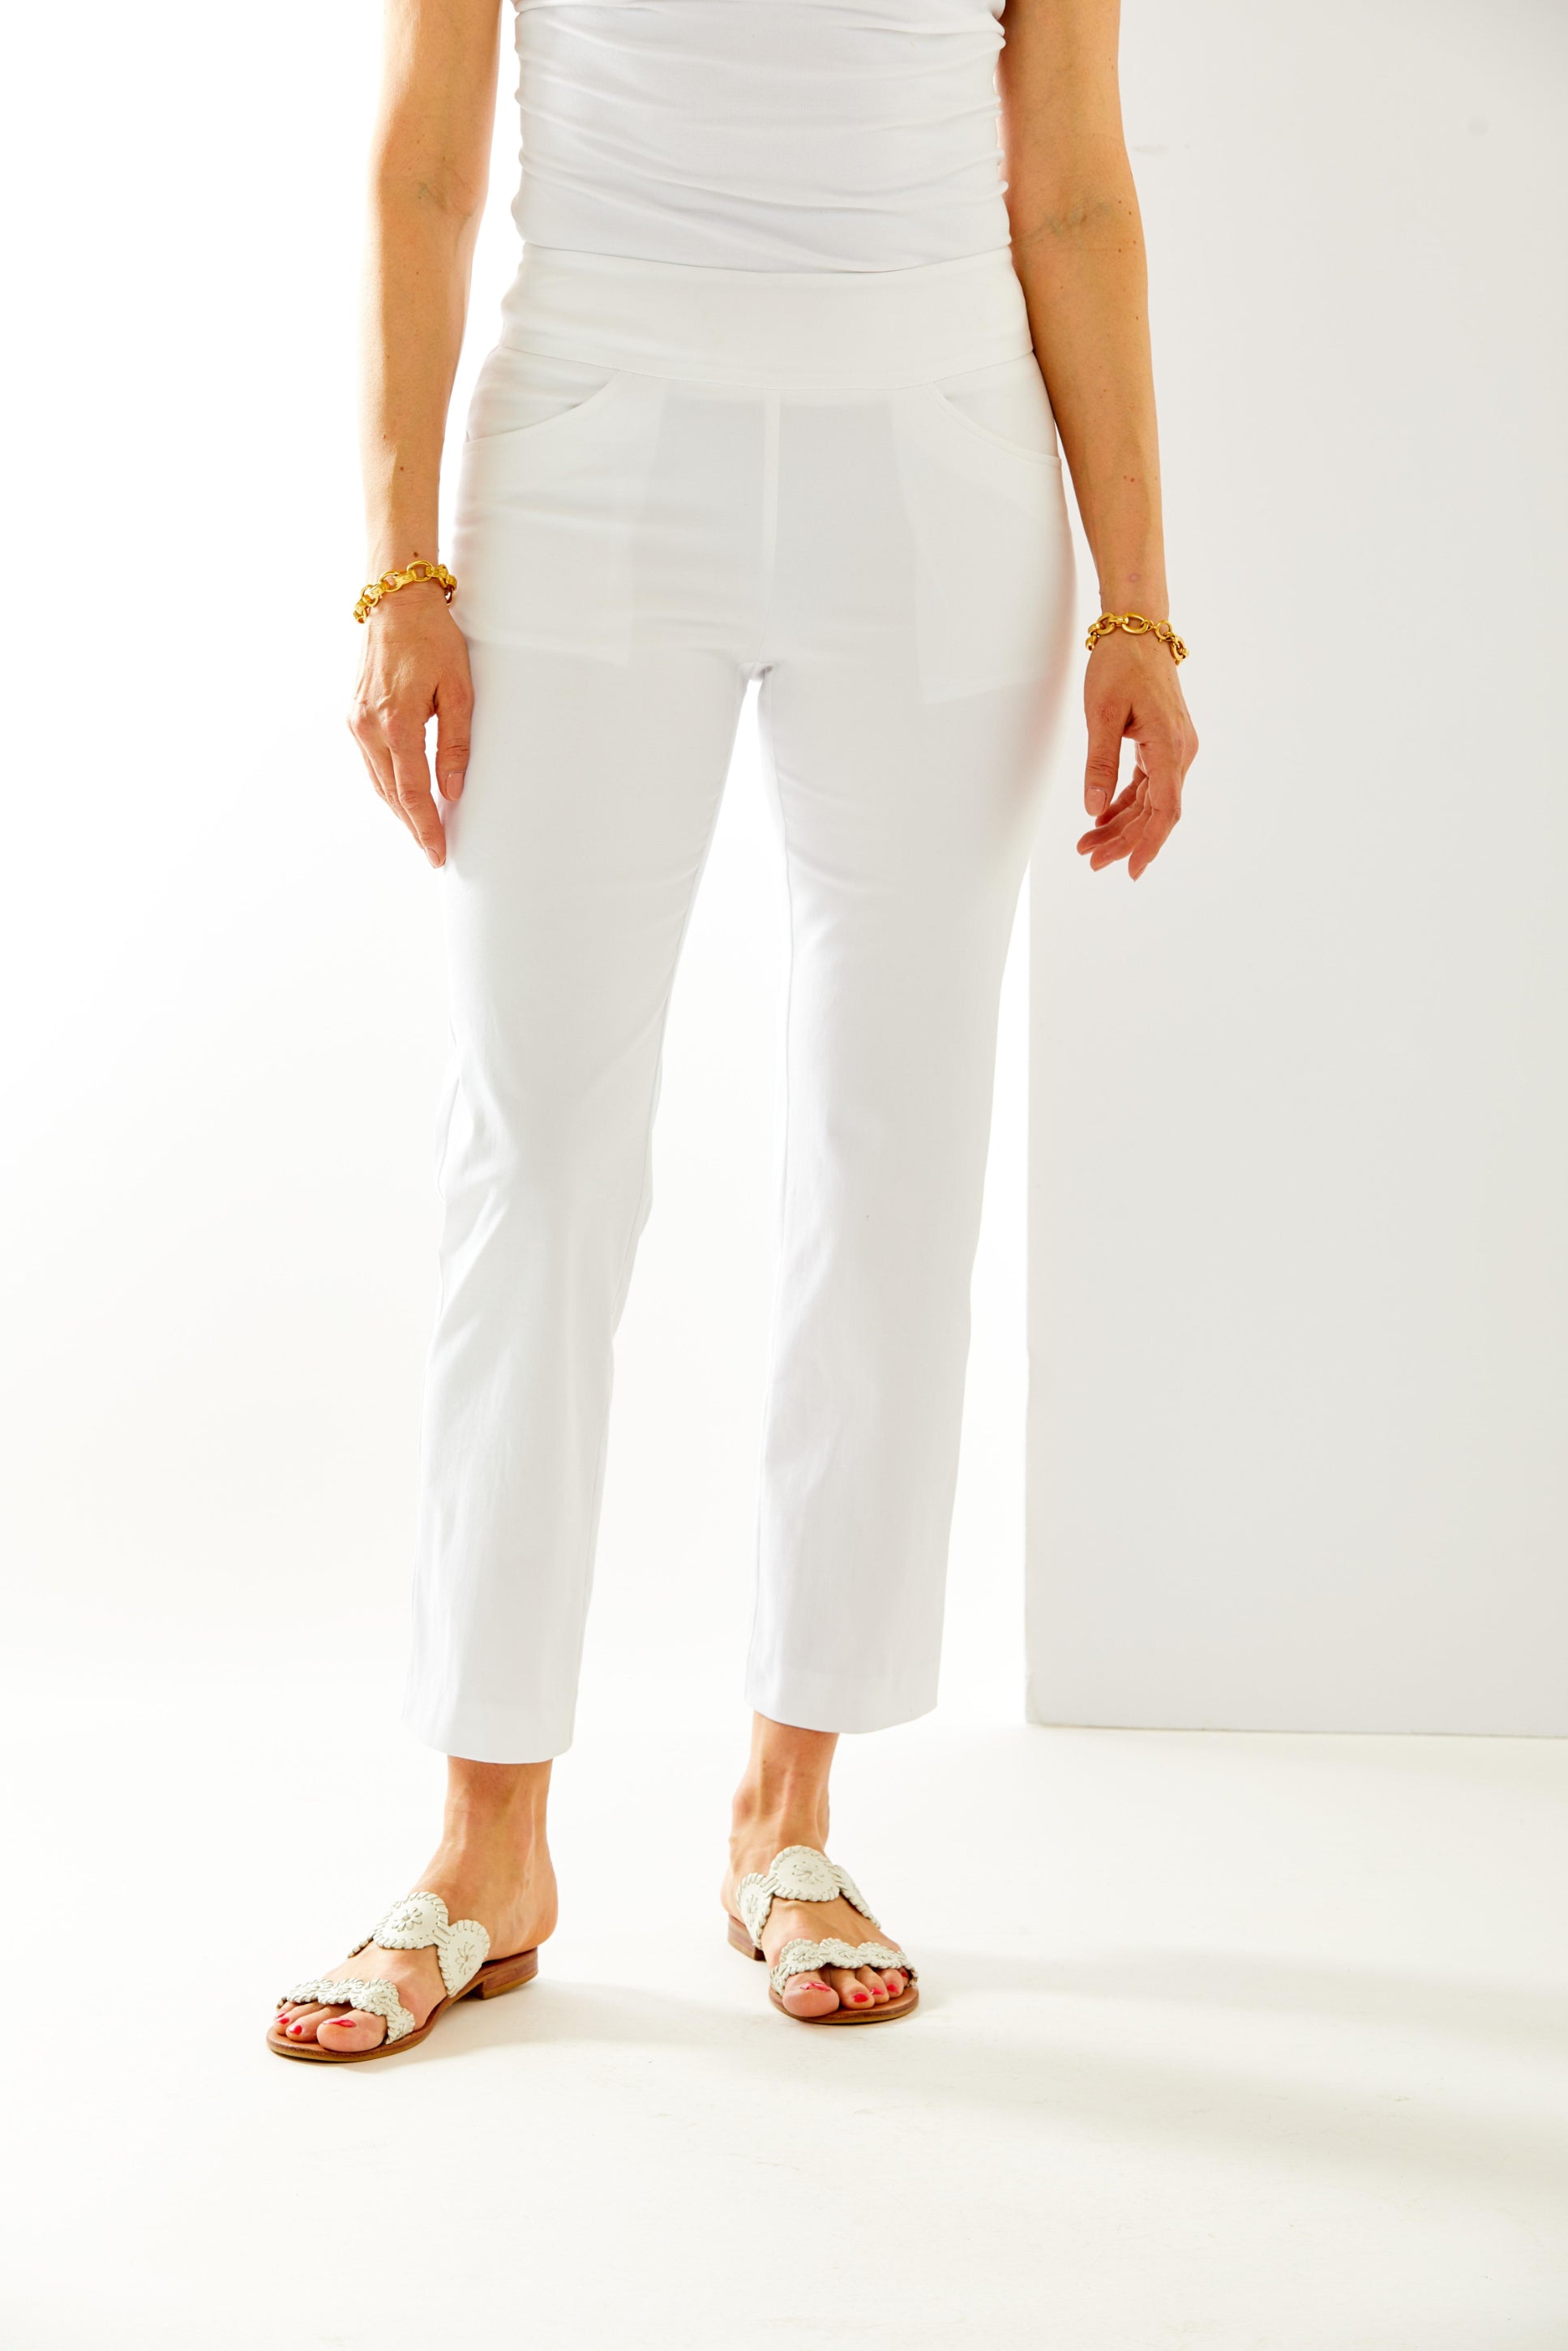 Woman in white pant